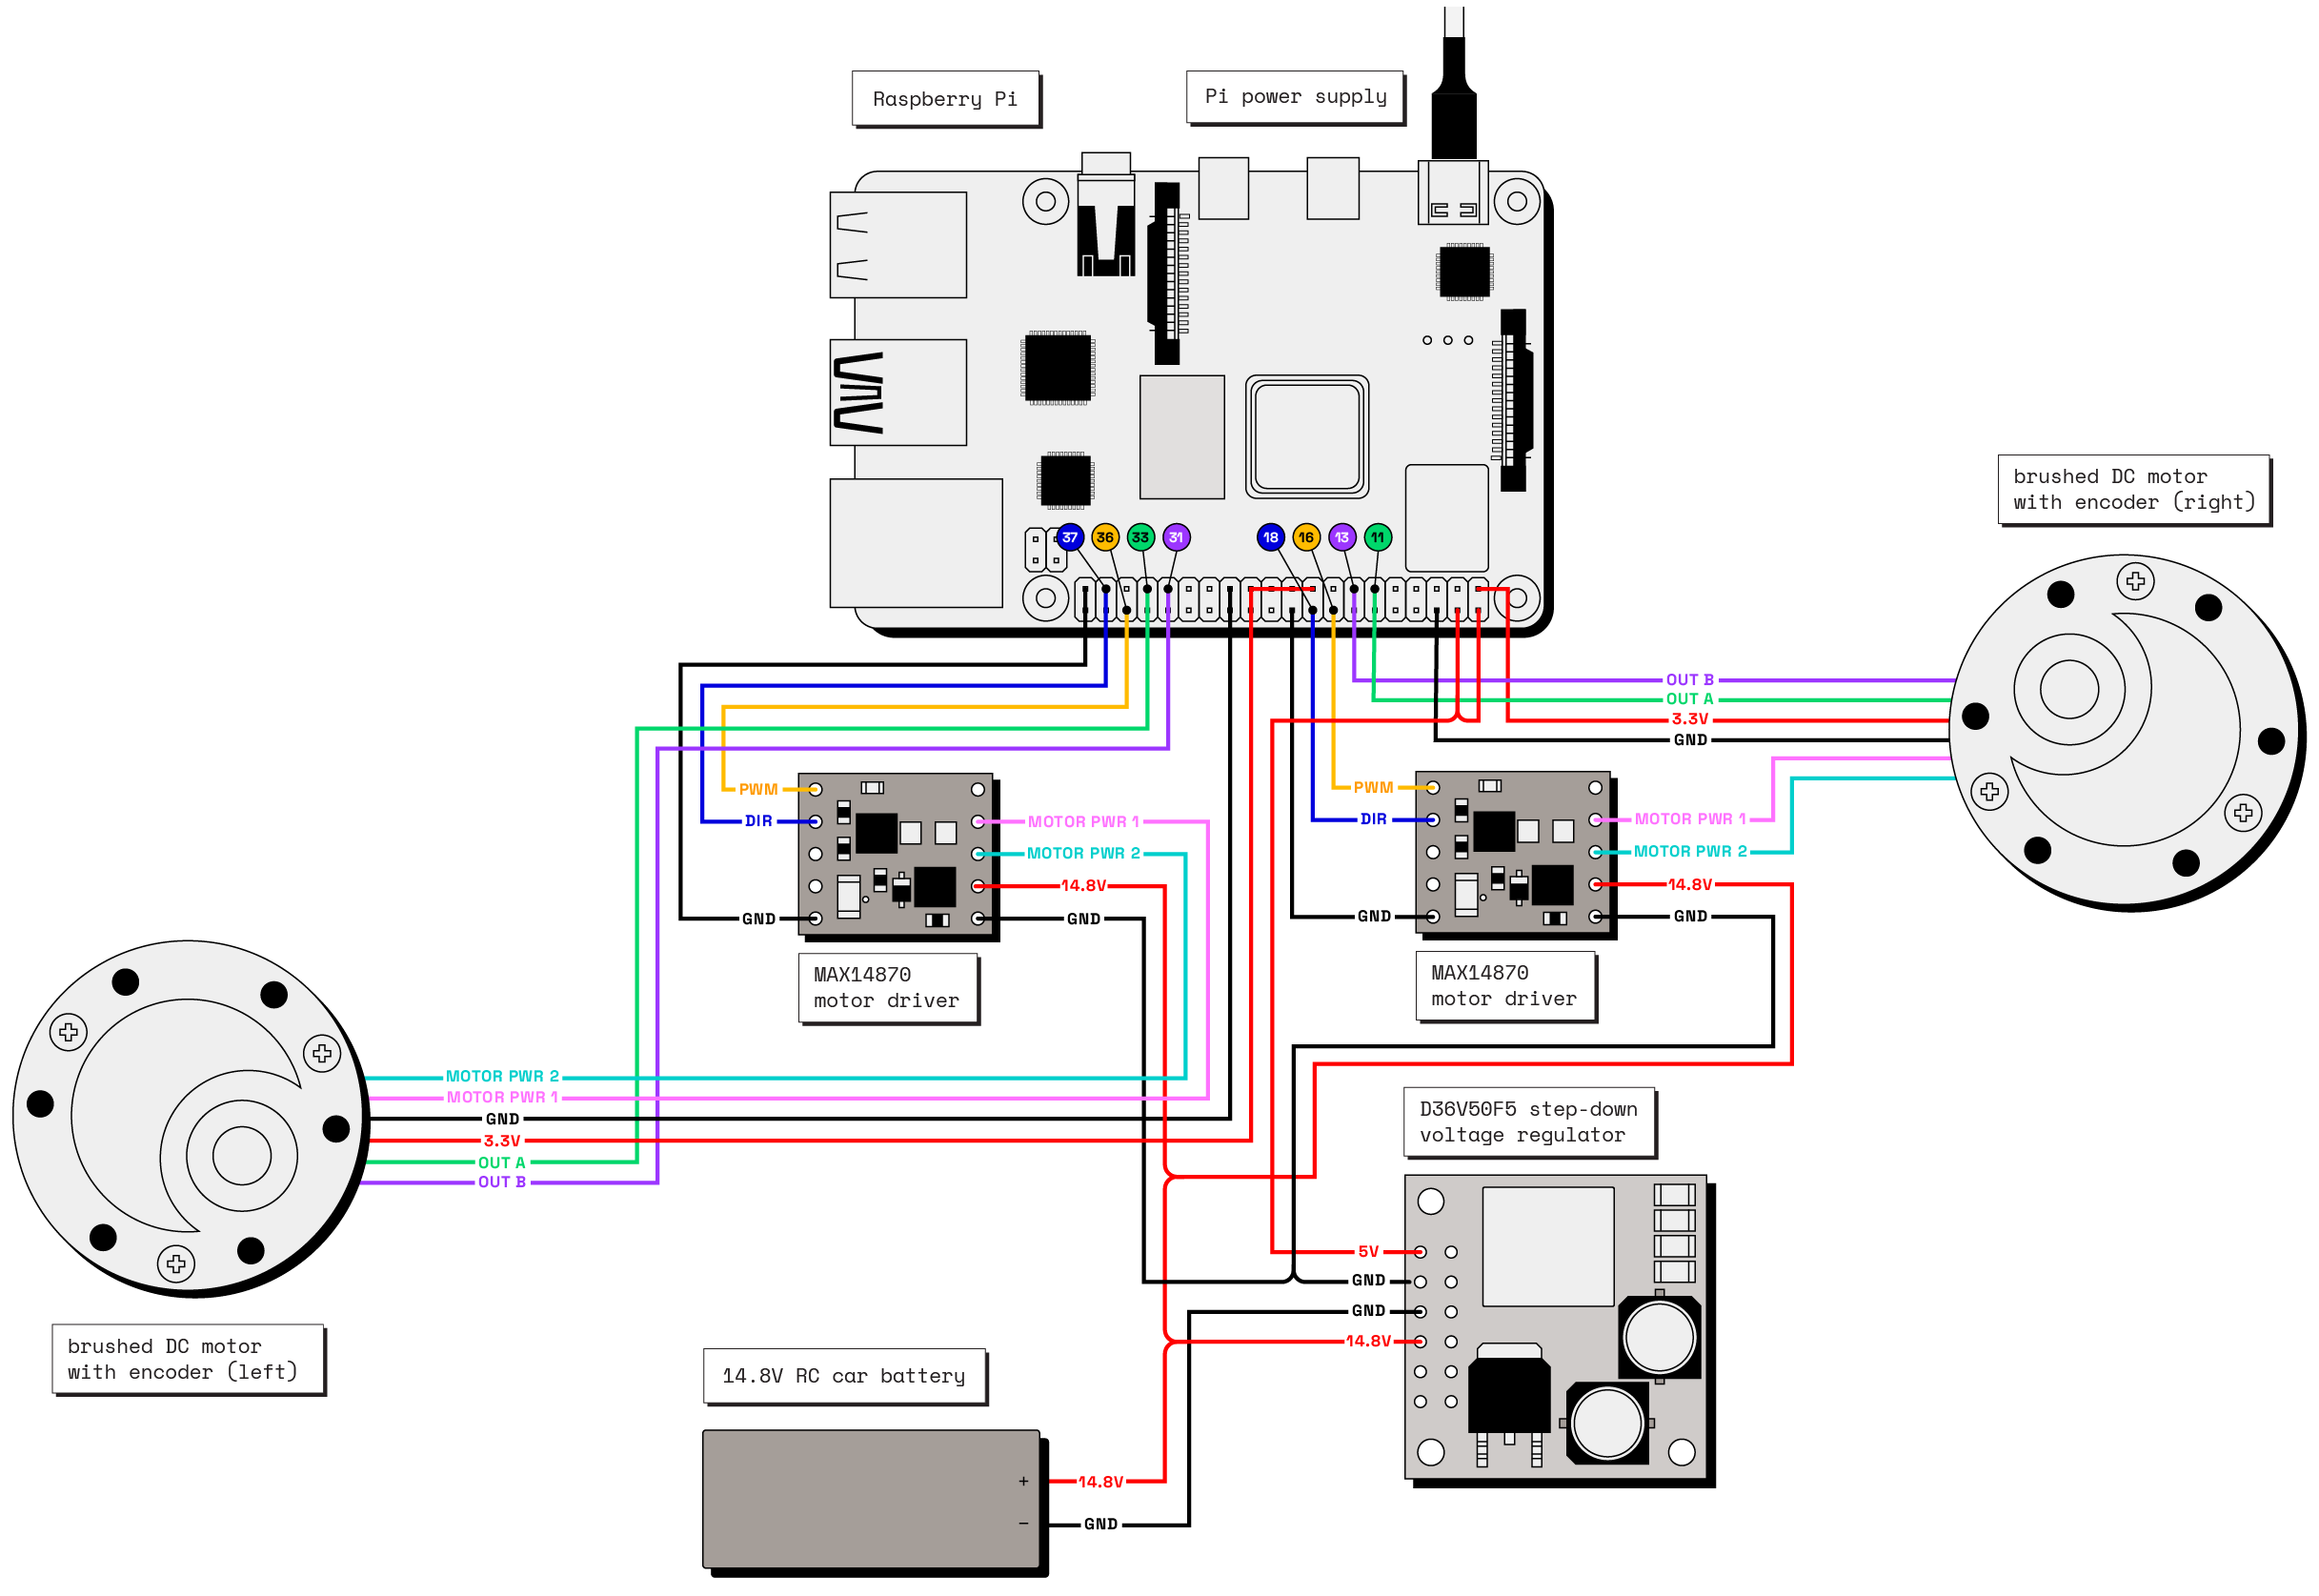 Wiring diagram showing a Raspberry Pi, motor drivers, motors, power supply, and voltage regulator for the rover